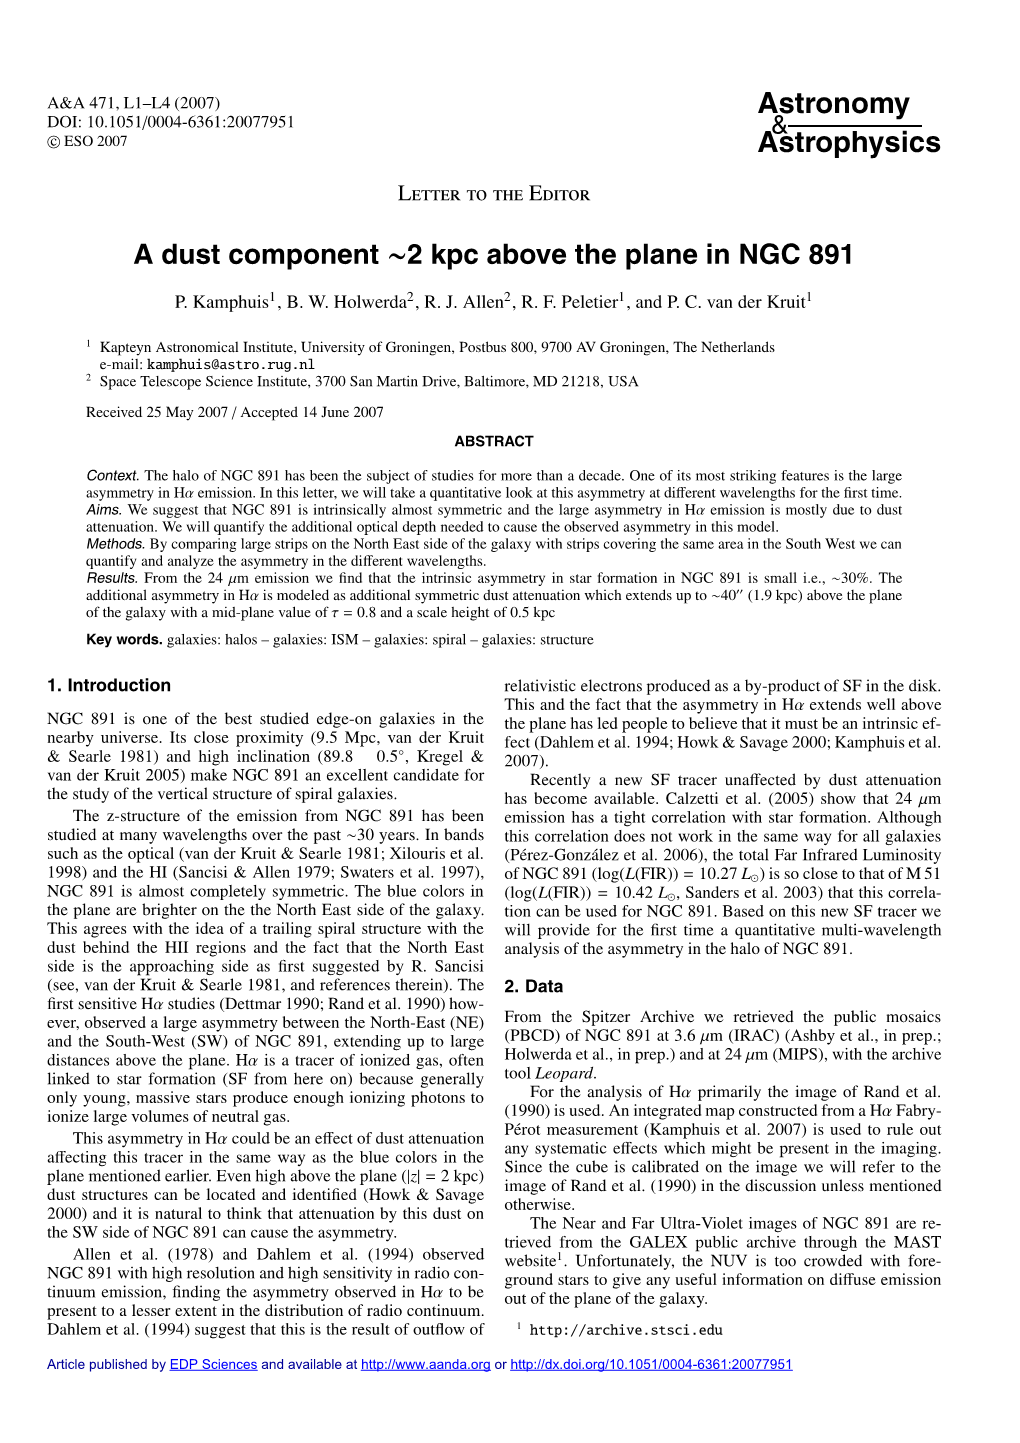 A Dust Component ~2 Kpc Above the Plane in NGC